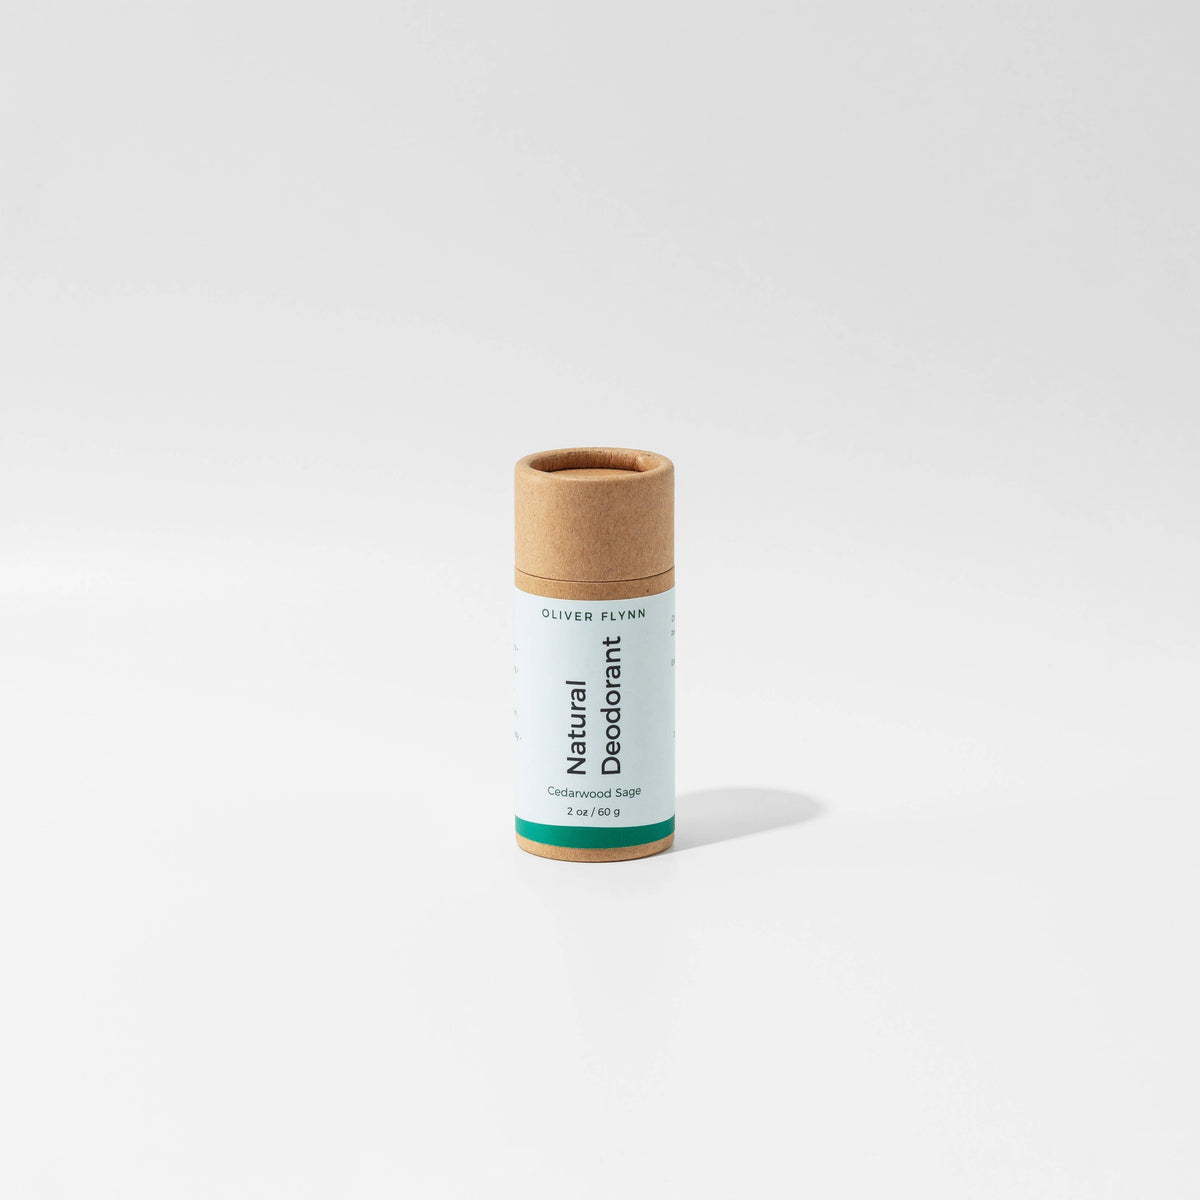 Natural Deodorant in compostable push-up tube